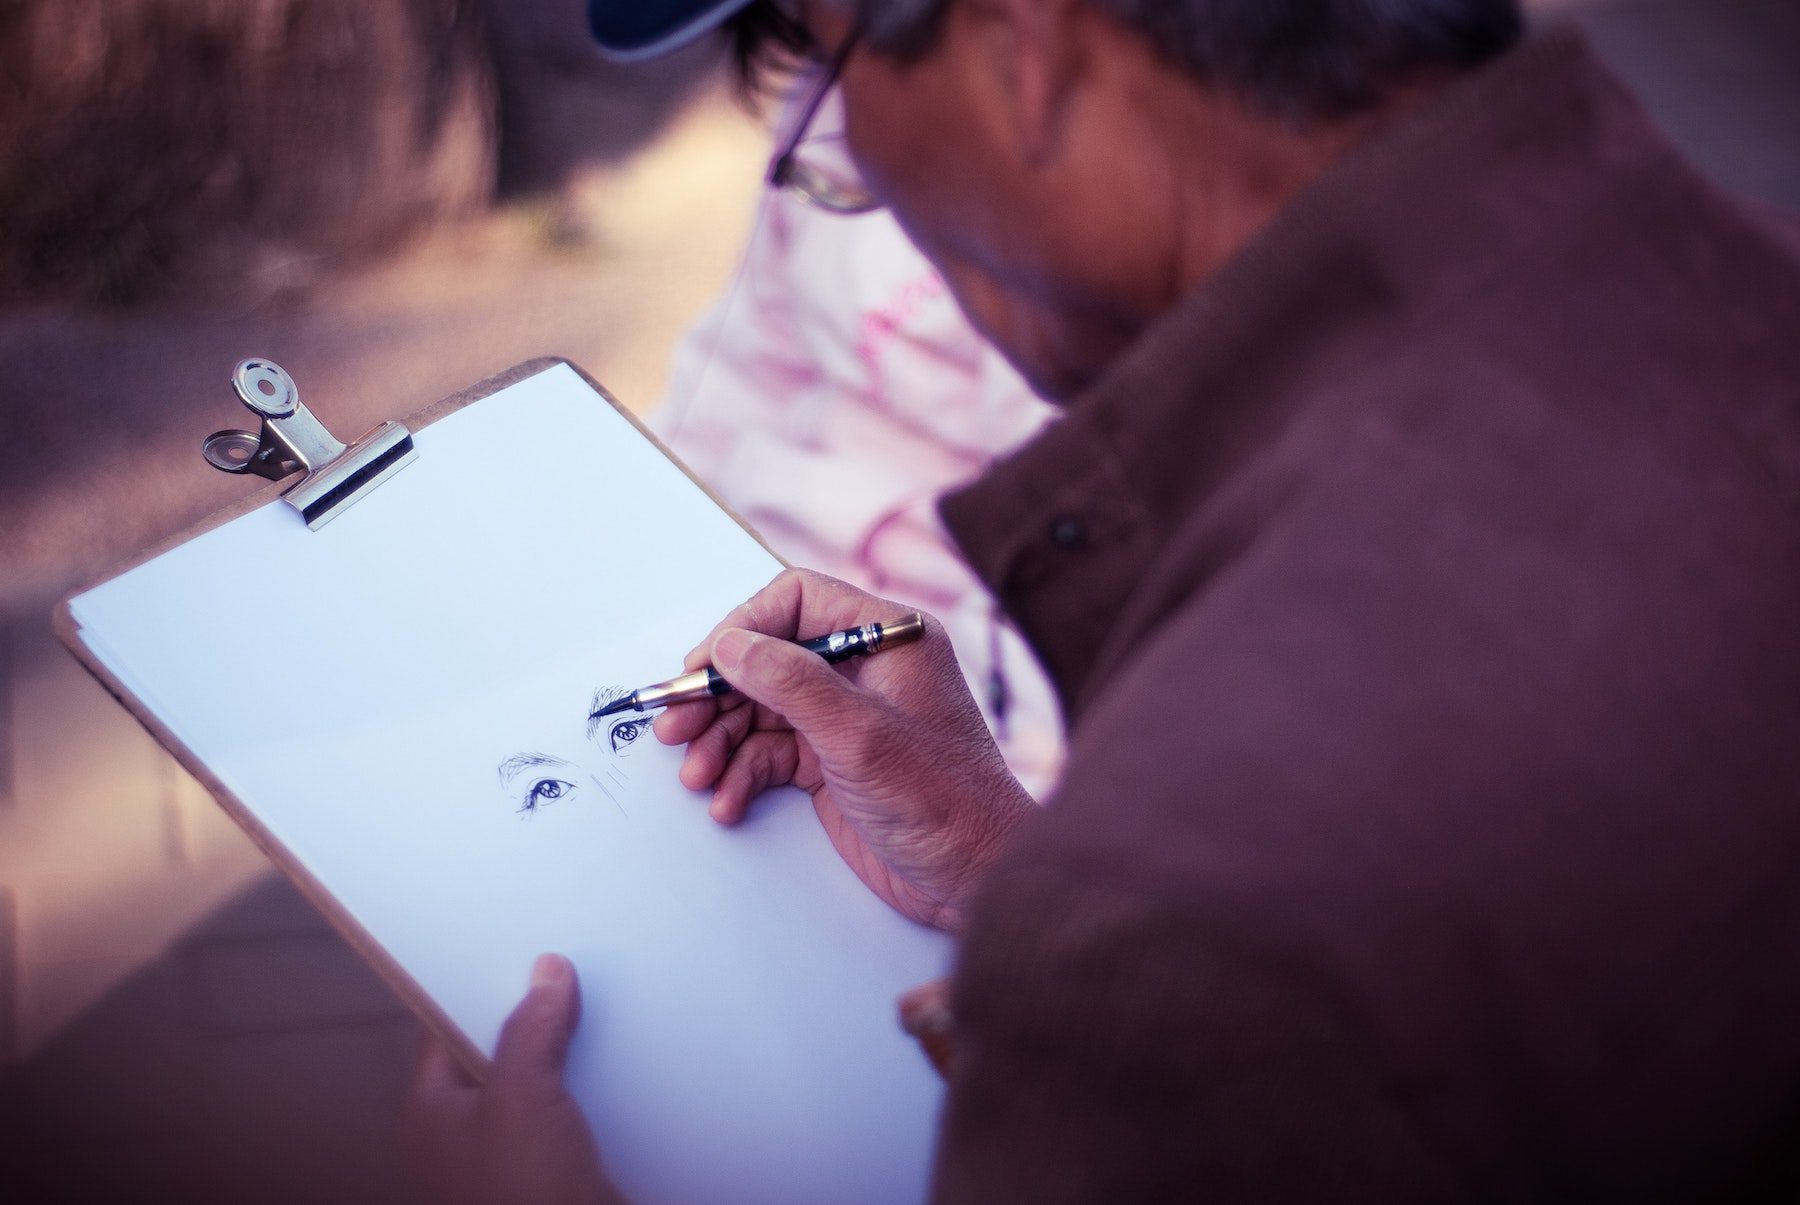 An artist wearing glasses, a hat and a brown coat sketching a pair of eyes on a blank sheet of paper on a clipboard